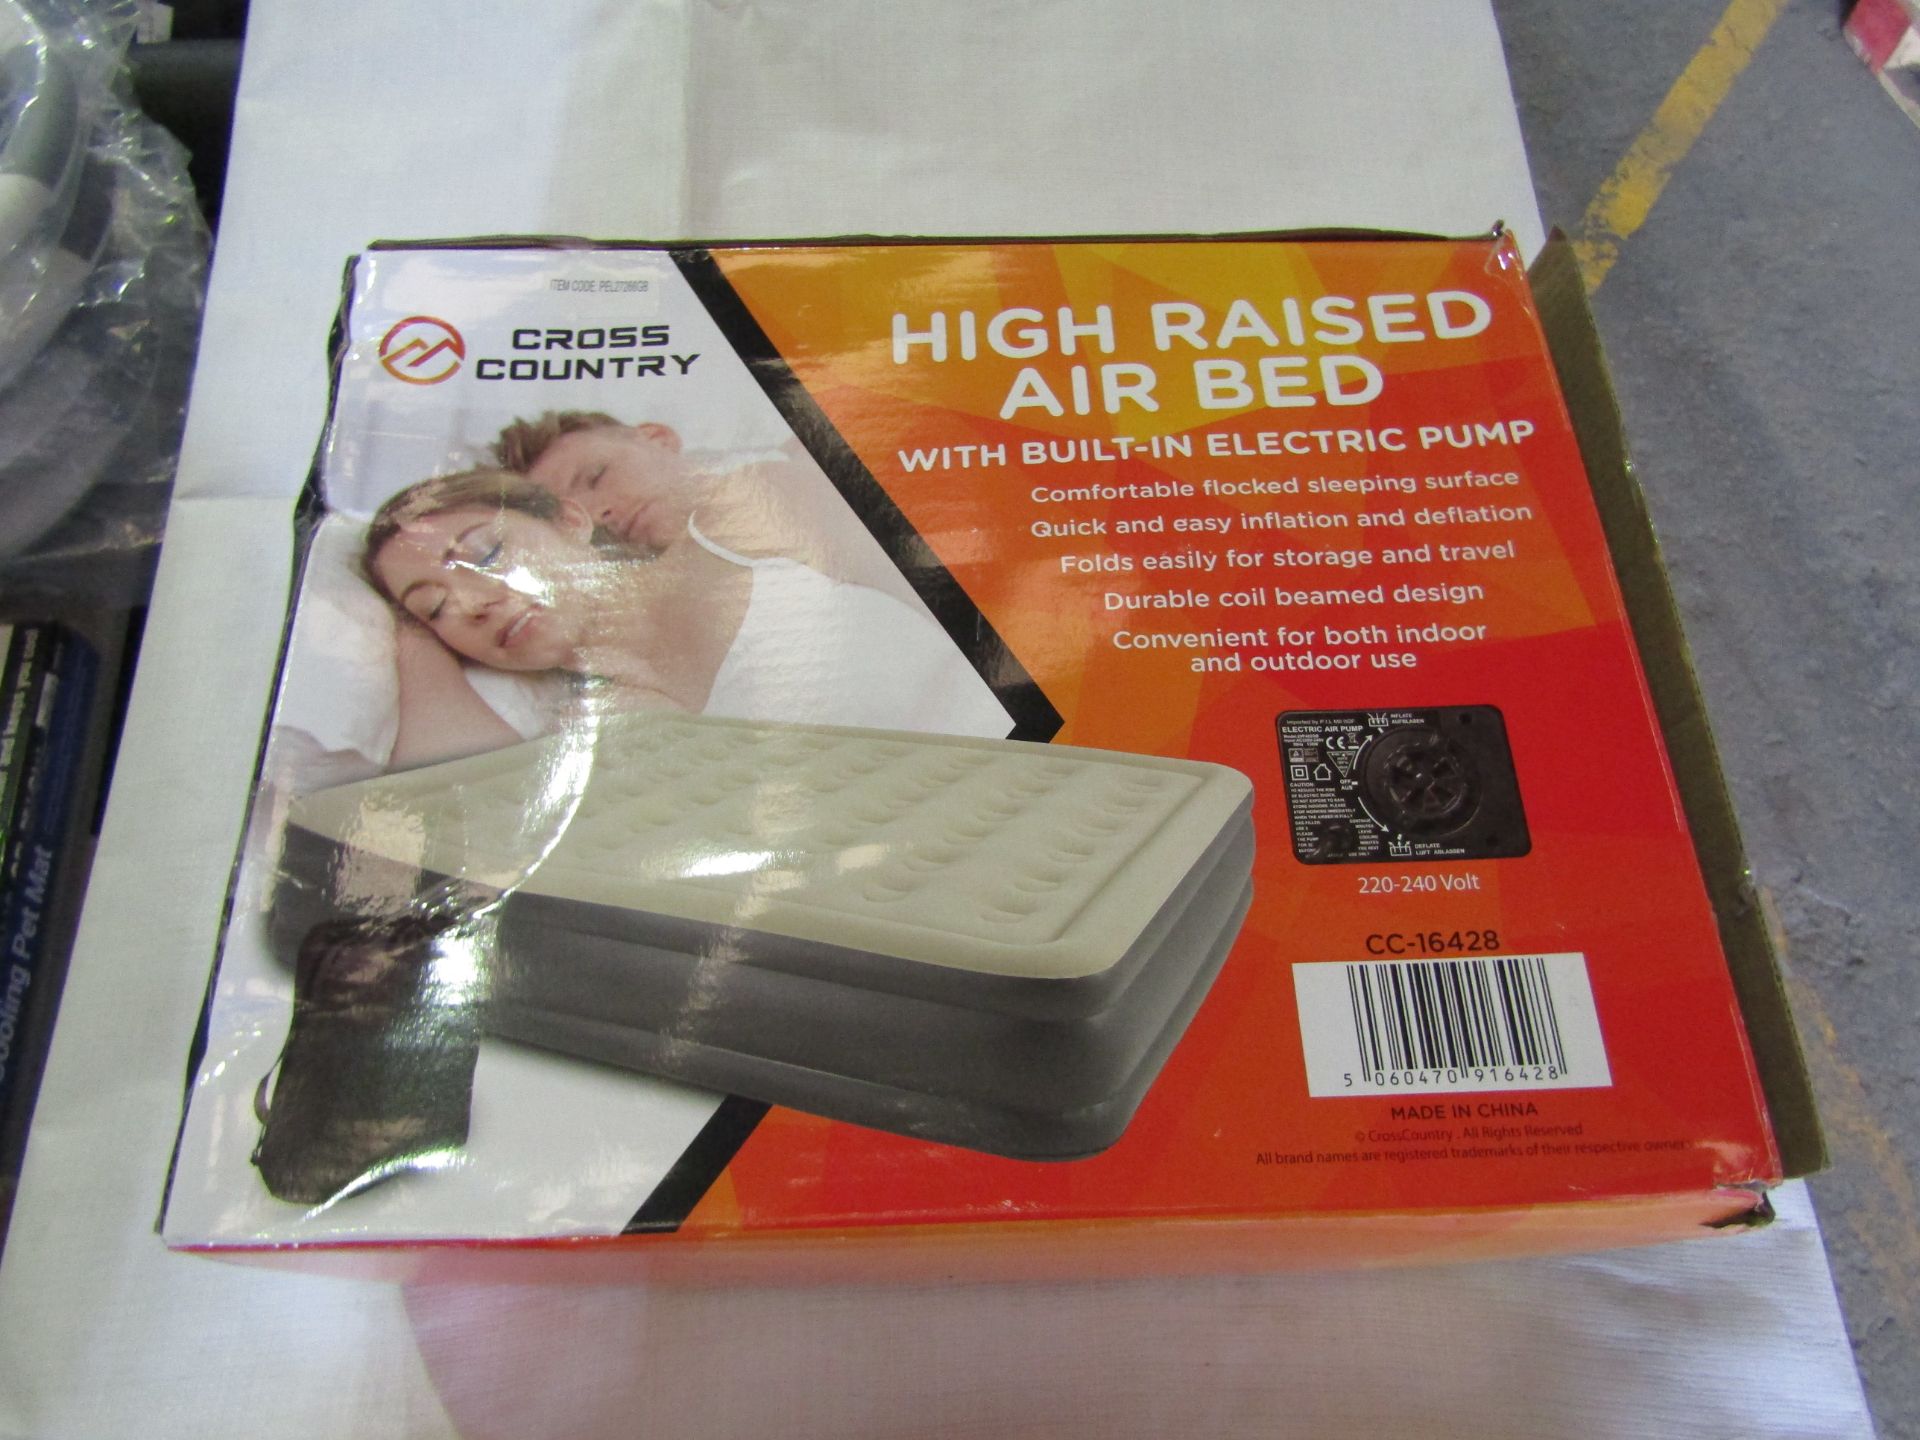 Cross Country Queen Size High Raised Air Bed With Built-In Electric Pump - Unchecked & Boxed.